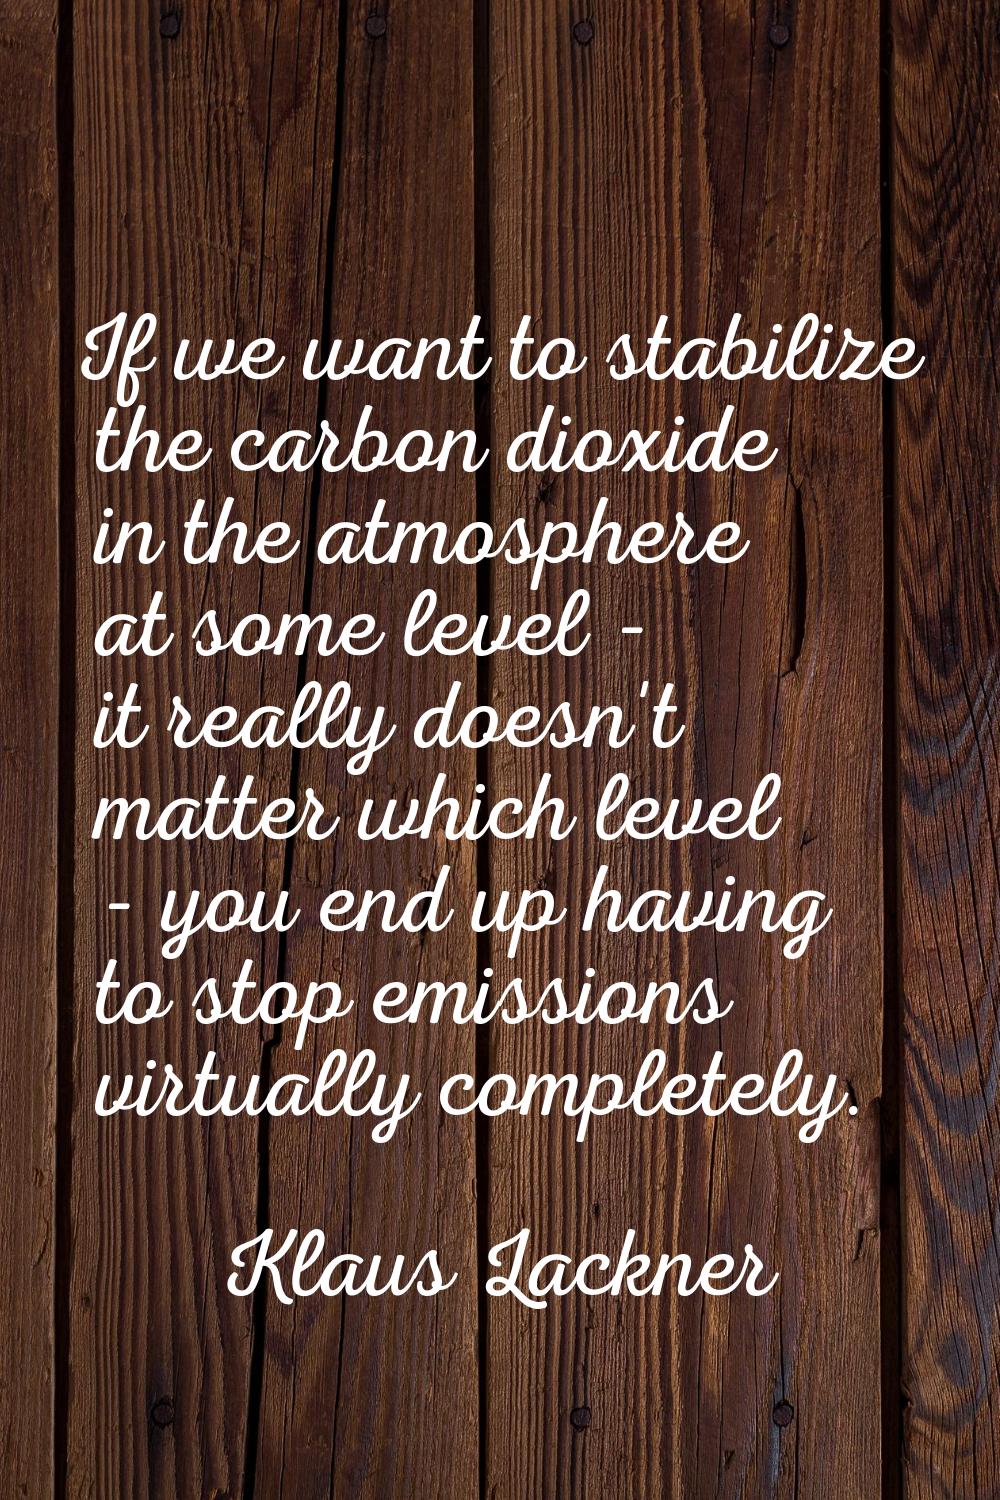 If we want to stabilize the carbon dioxide in the atmosphere at some level - it really doesn't matt